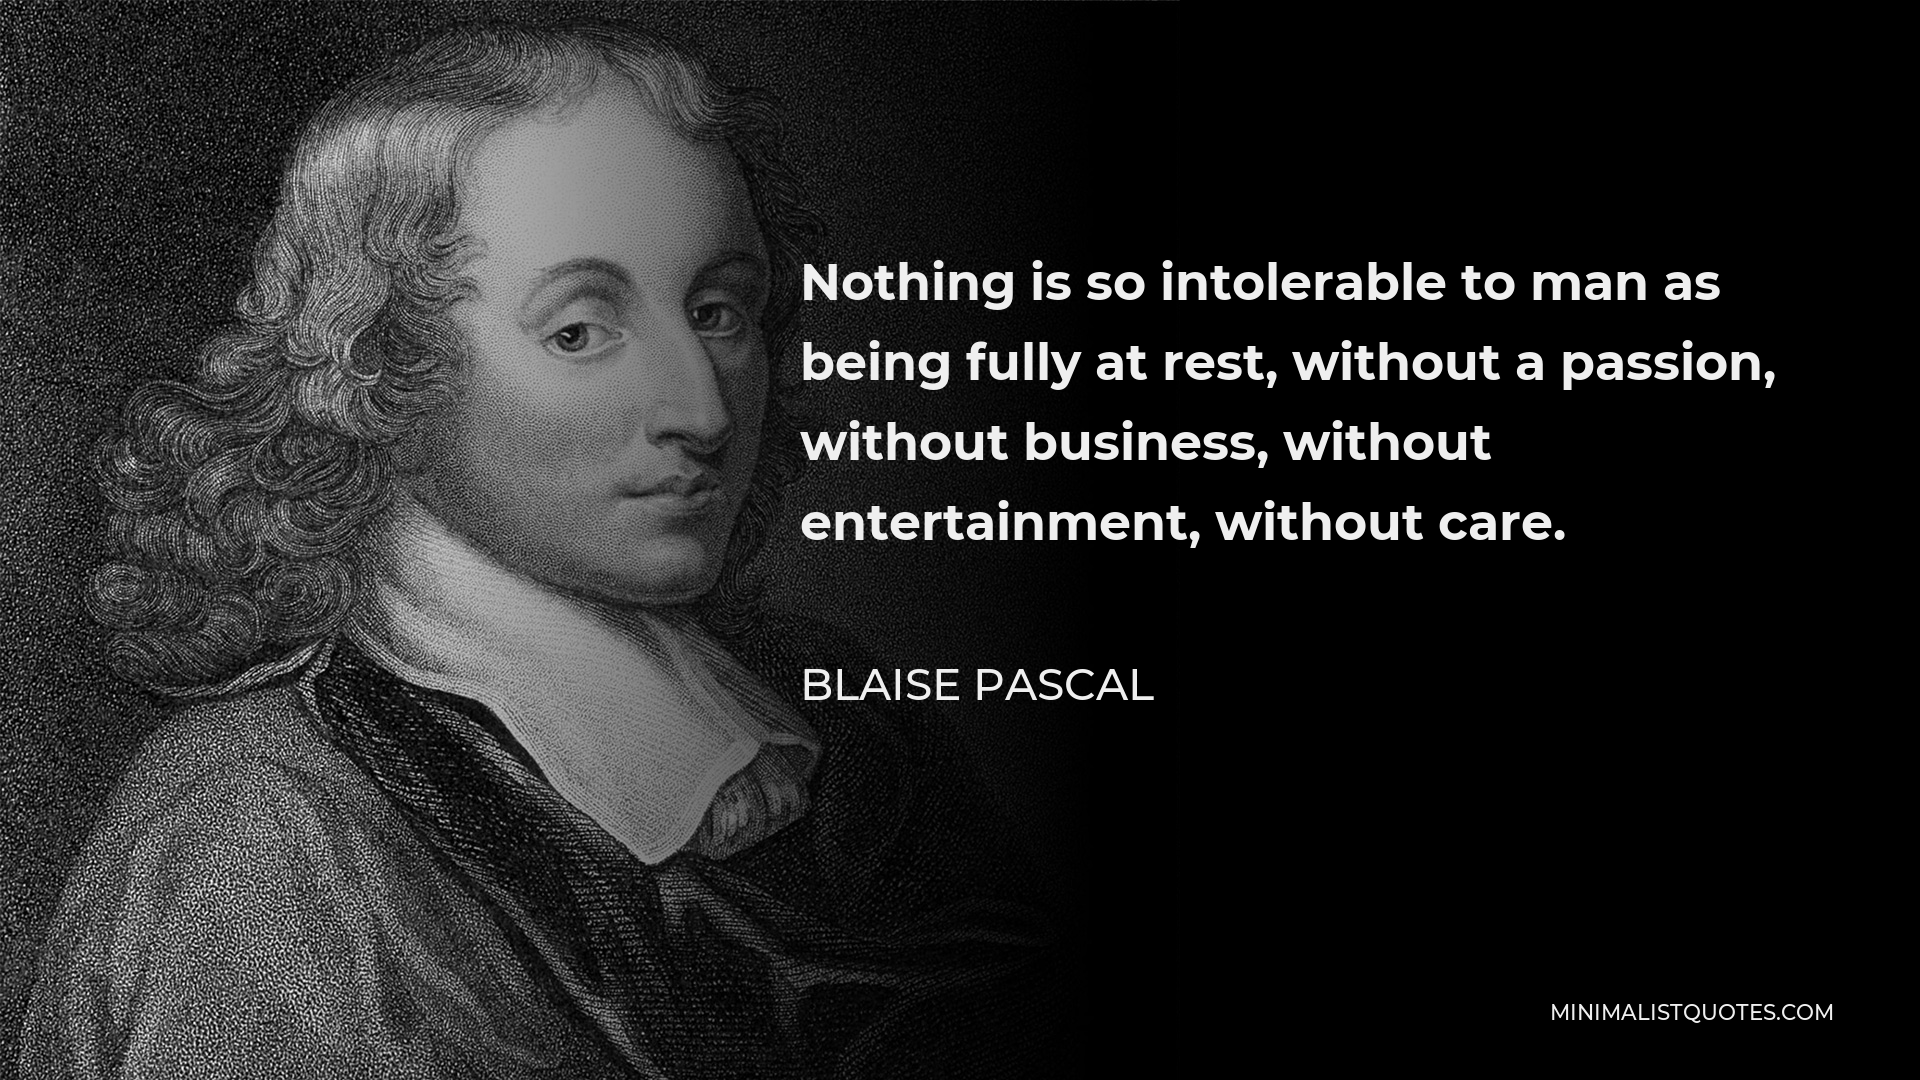 Blaise Pascal Quote - Nothing is so intolerable to man as being fully at rest, without a passion, without business, without entertainment, without care.